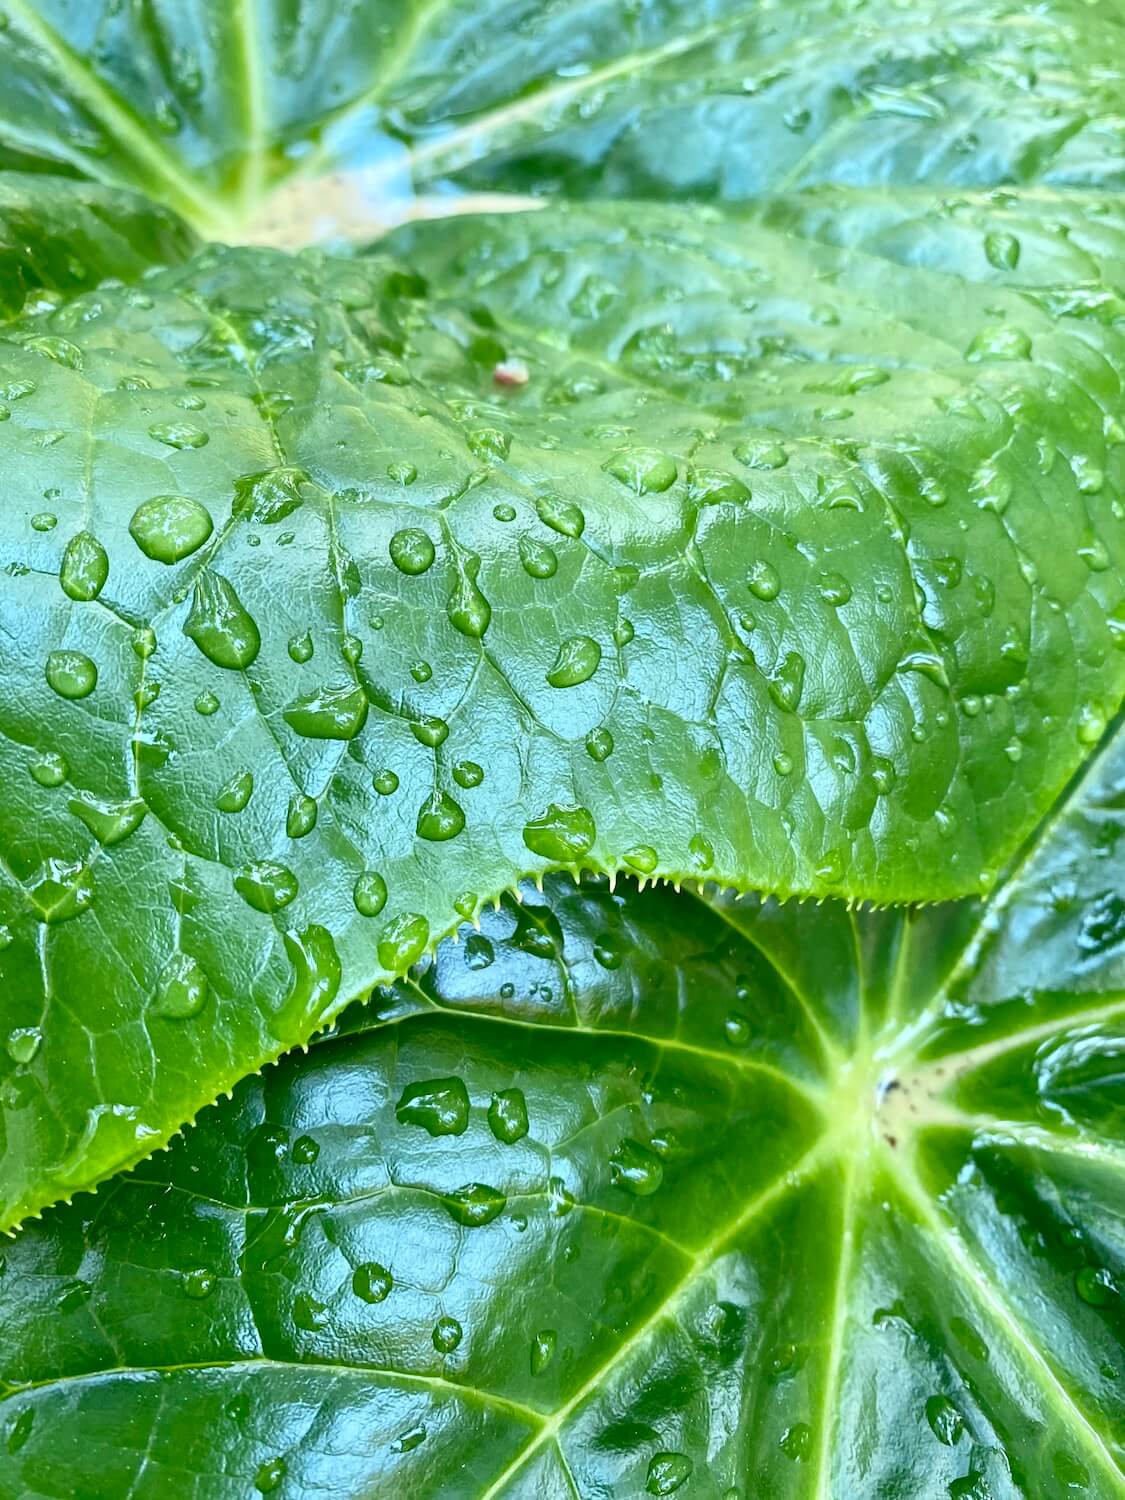 Large clumsy wet drops of water pool on a waxy green leaf of a forest plant.  The leave has gentle veins that lead to jagged spikes on the edges. 